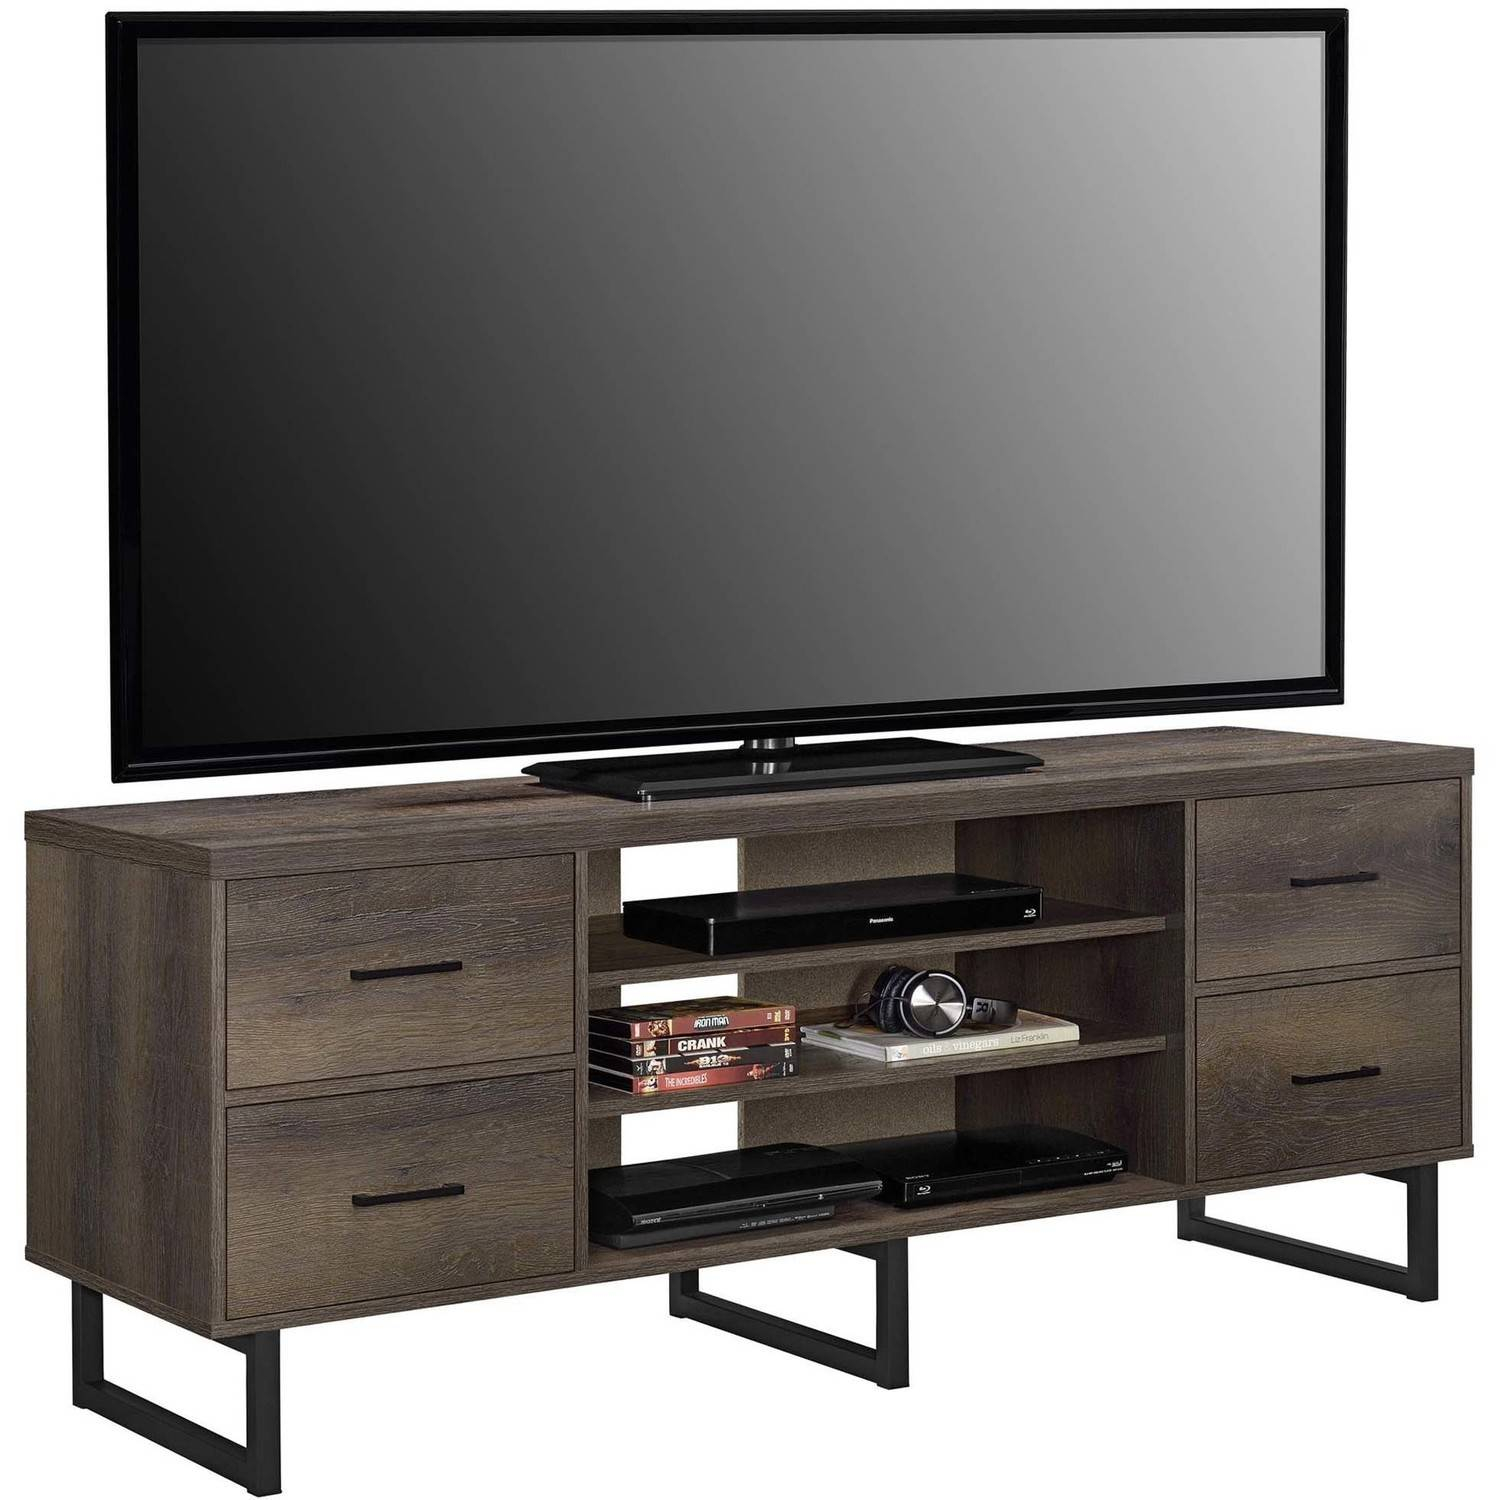 Ameriwood Home Candon Tv Stand With Bins For Tvs Up To 60 Wide with regard to measurements 1500 X 1500